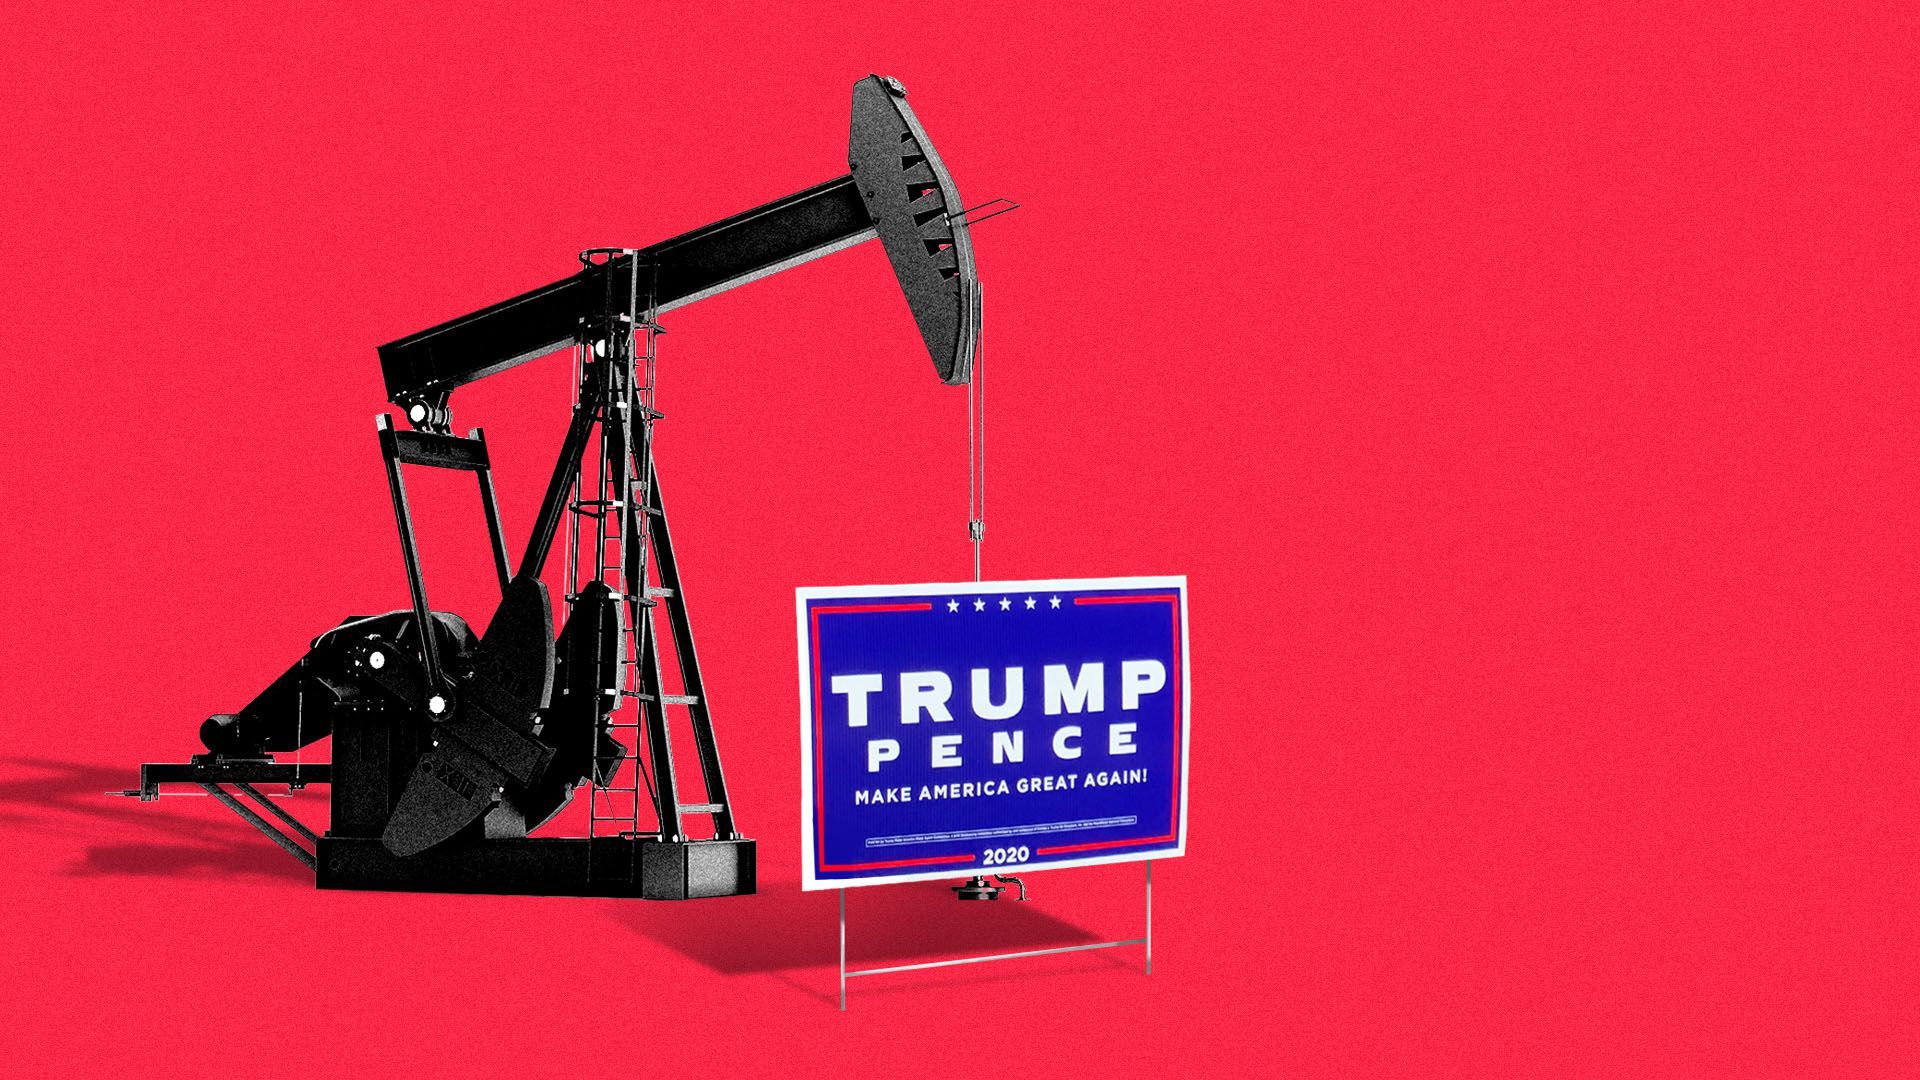 Illustration of an oil well with a Trump Pence lawn sign in front